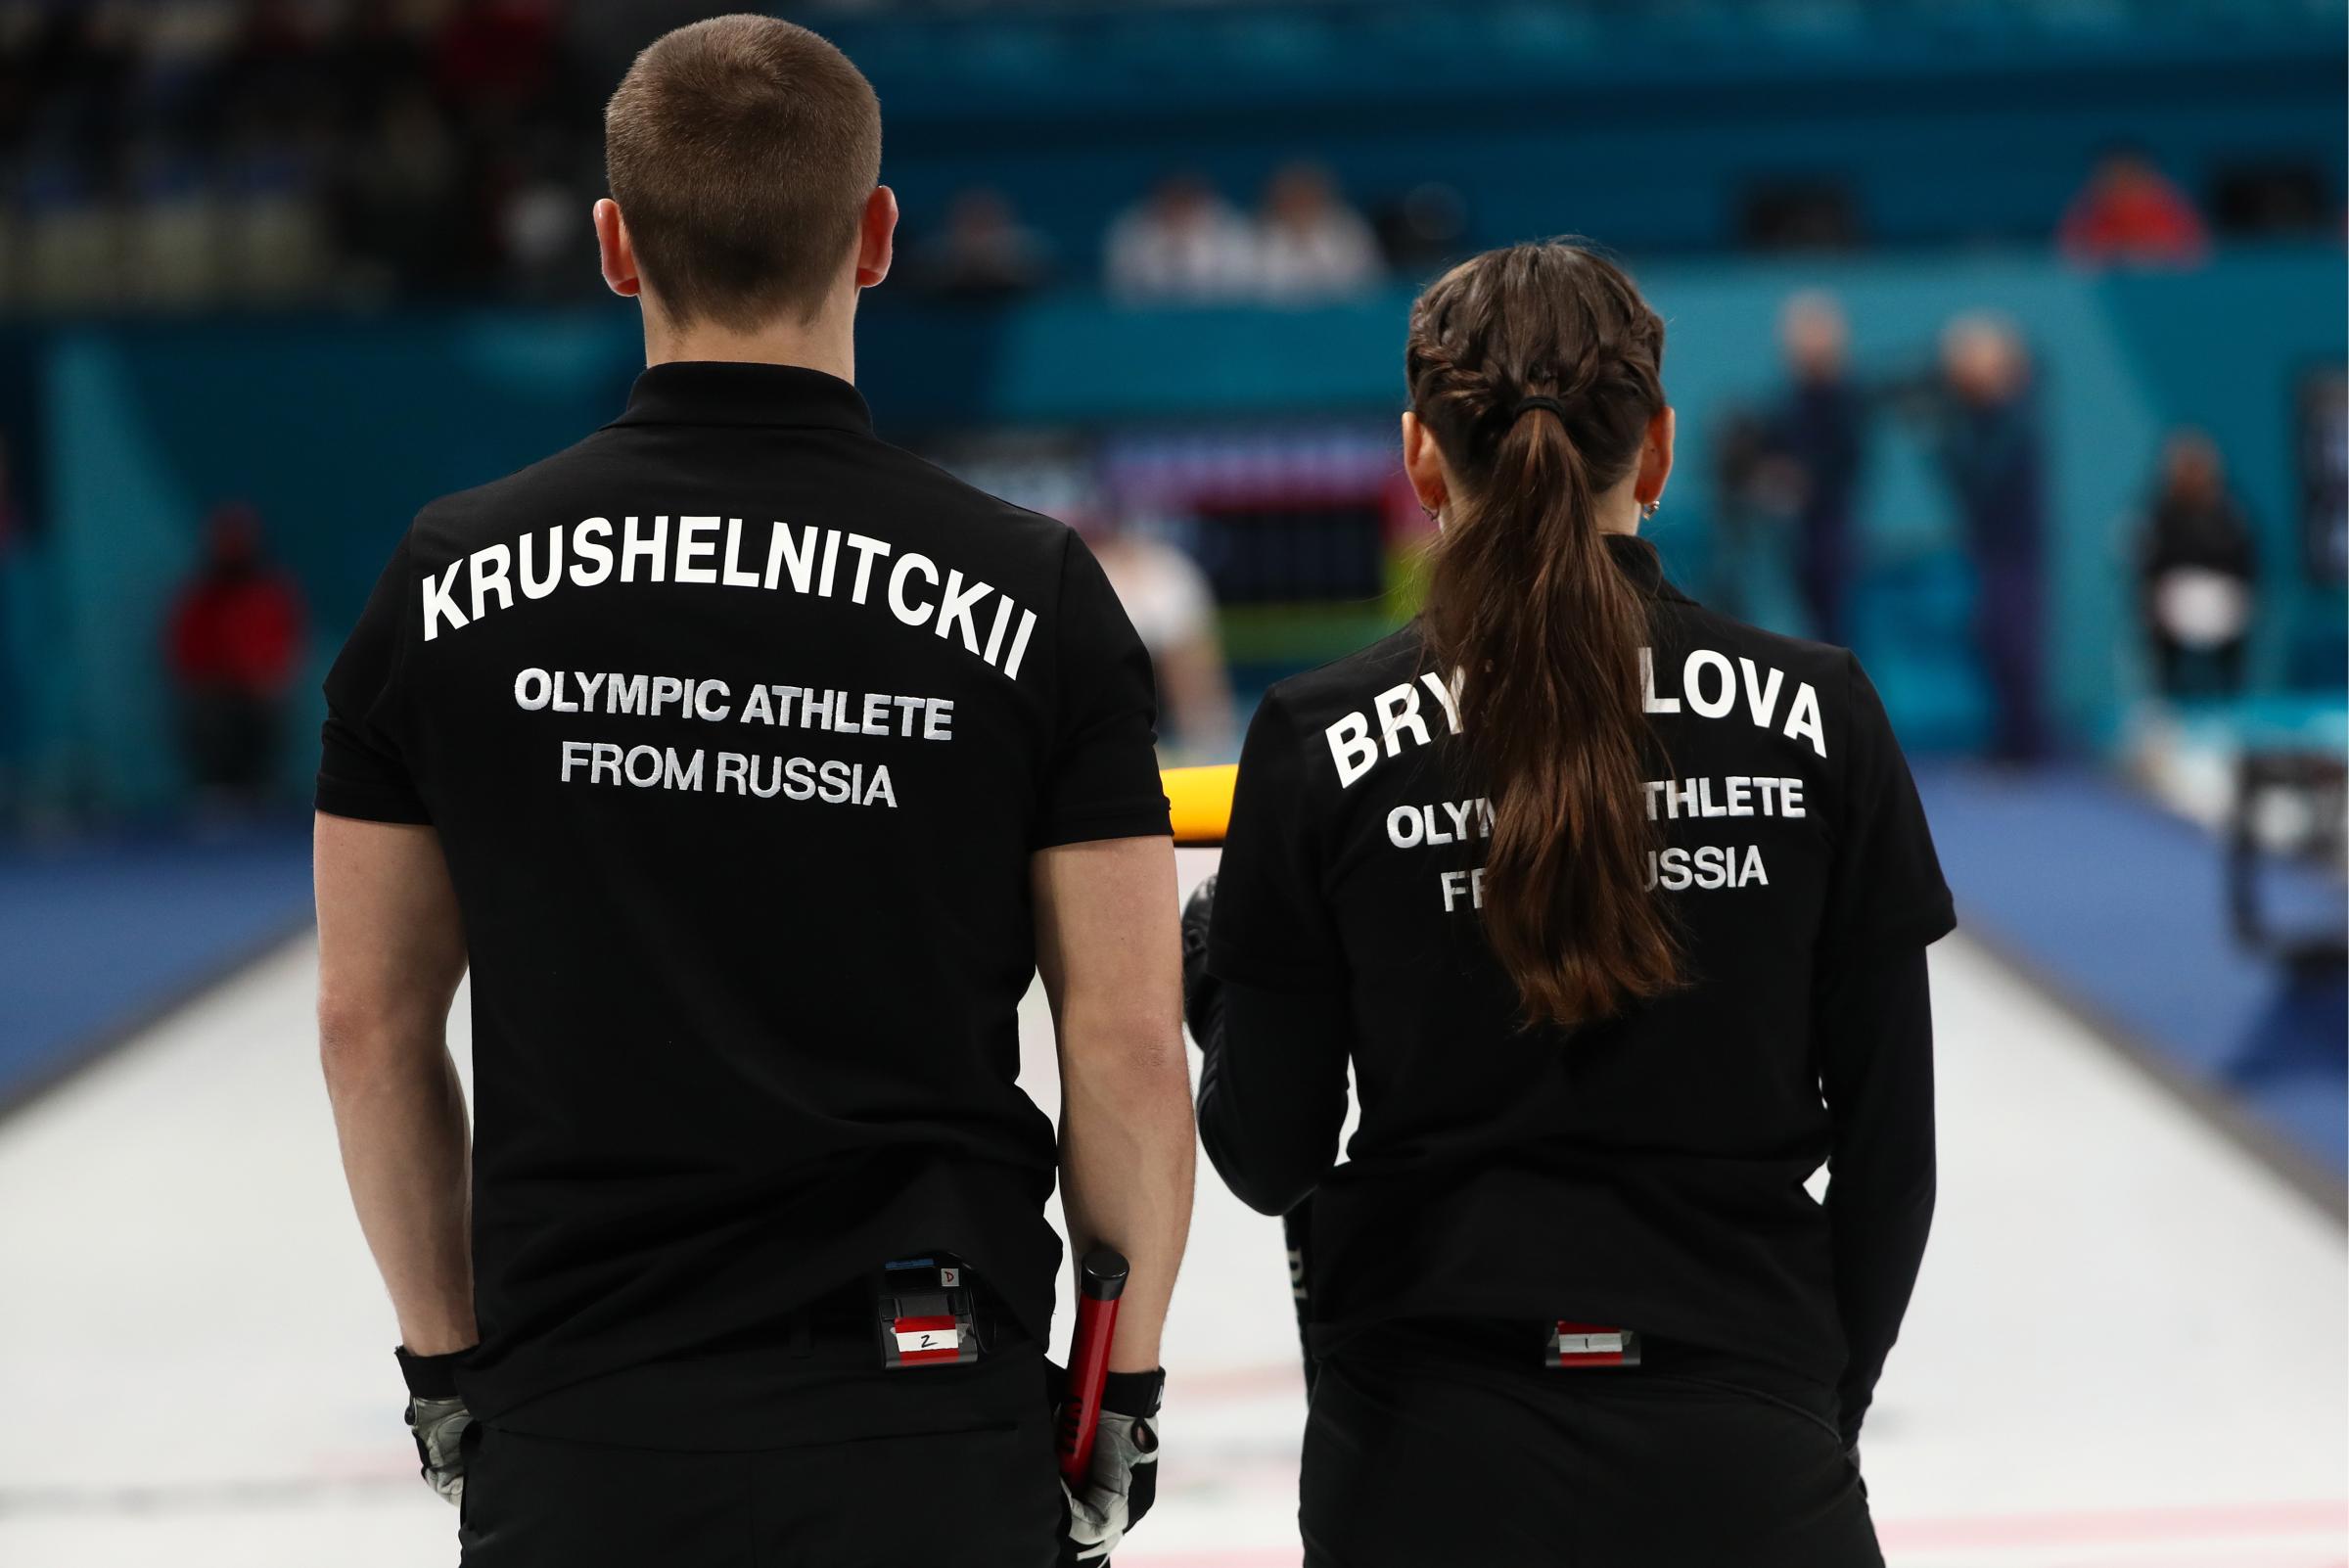 2018 Winter Olympic Games, Curling, Mixed Doubles: Olympic Athletes from Russia 7 - 5 Finland